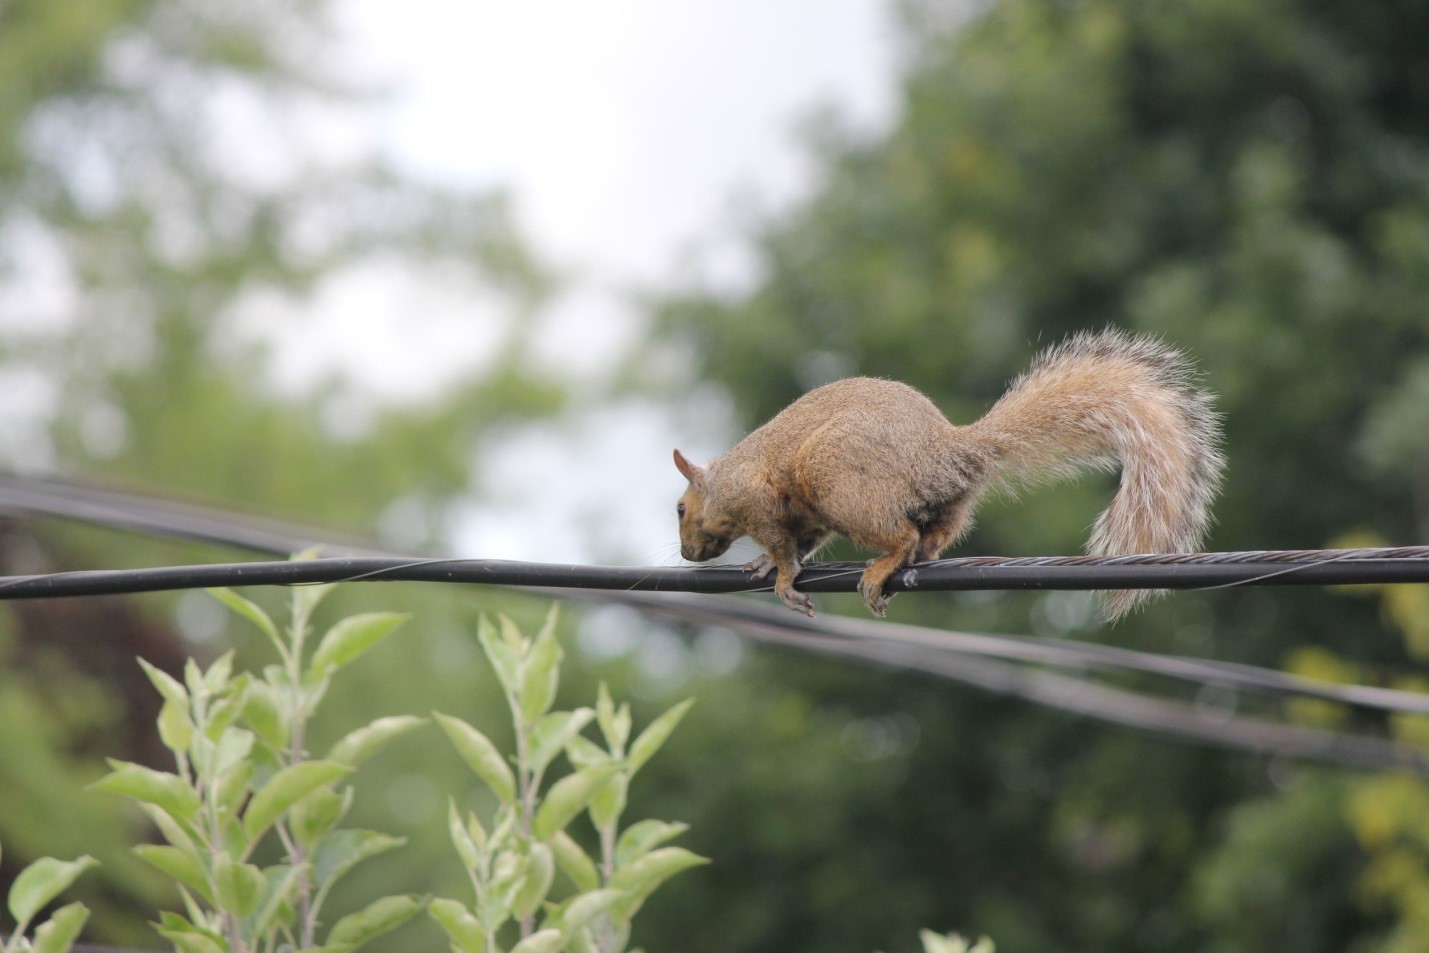 Squirrels cause extensive damage to buildings and furnishings